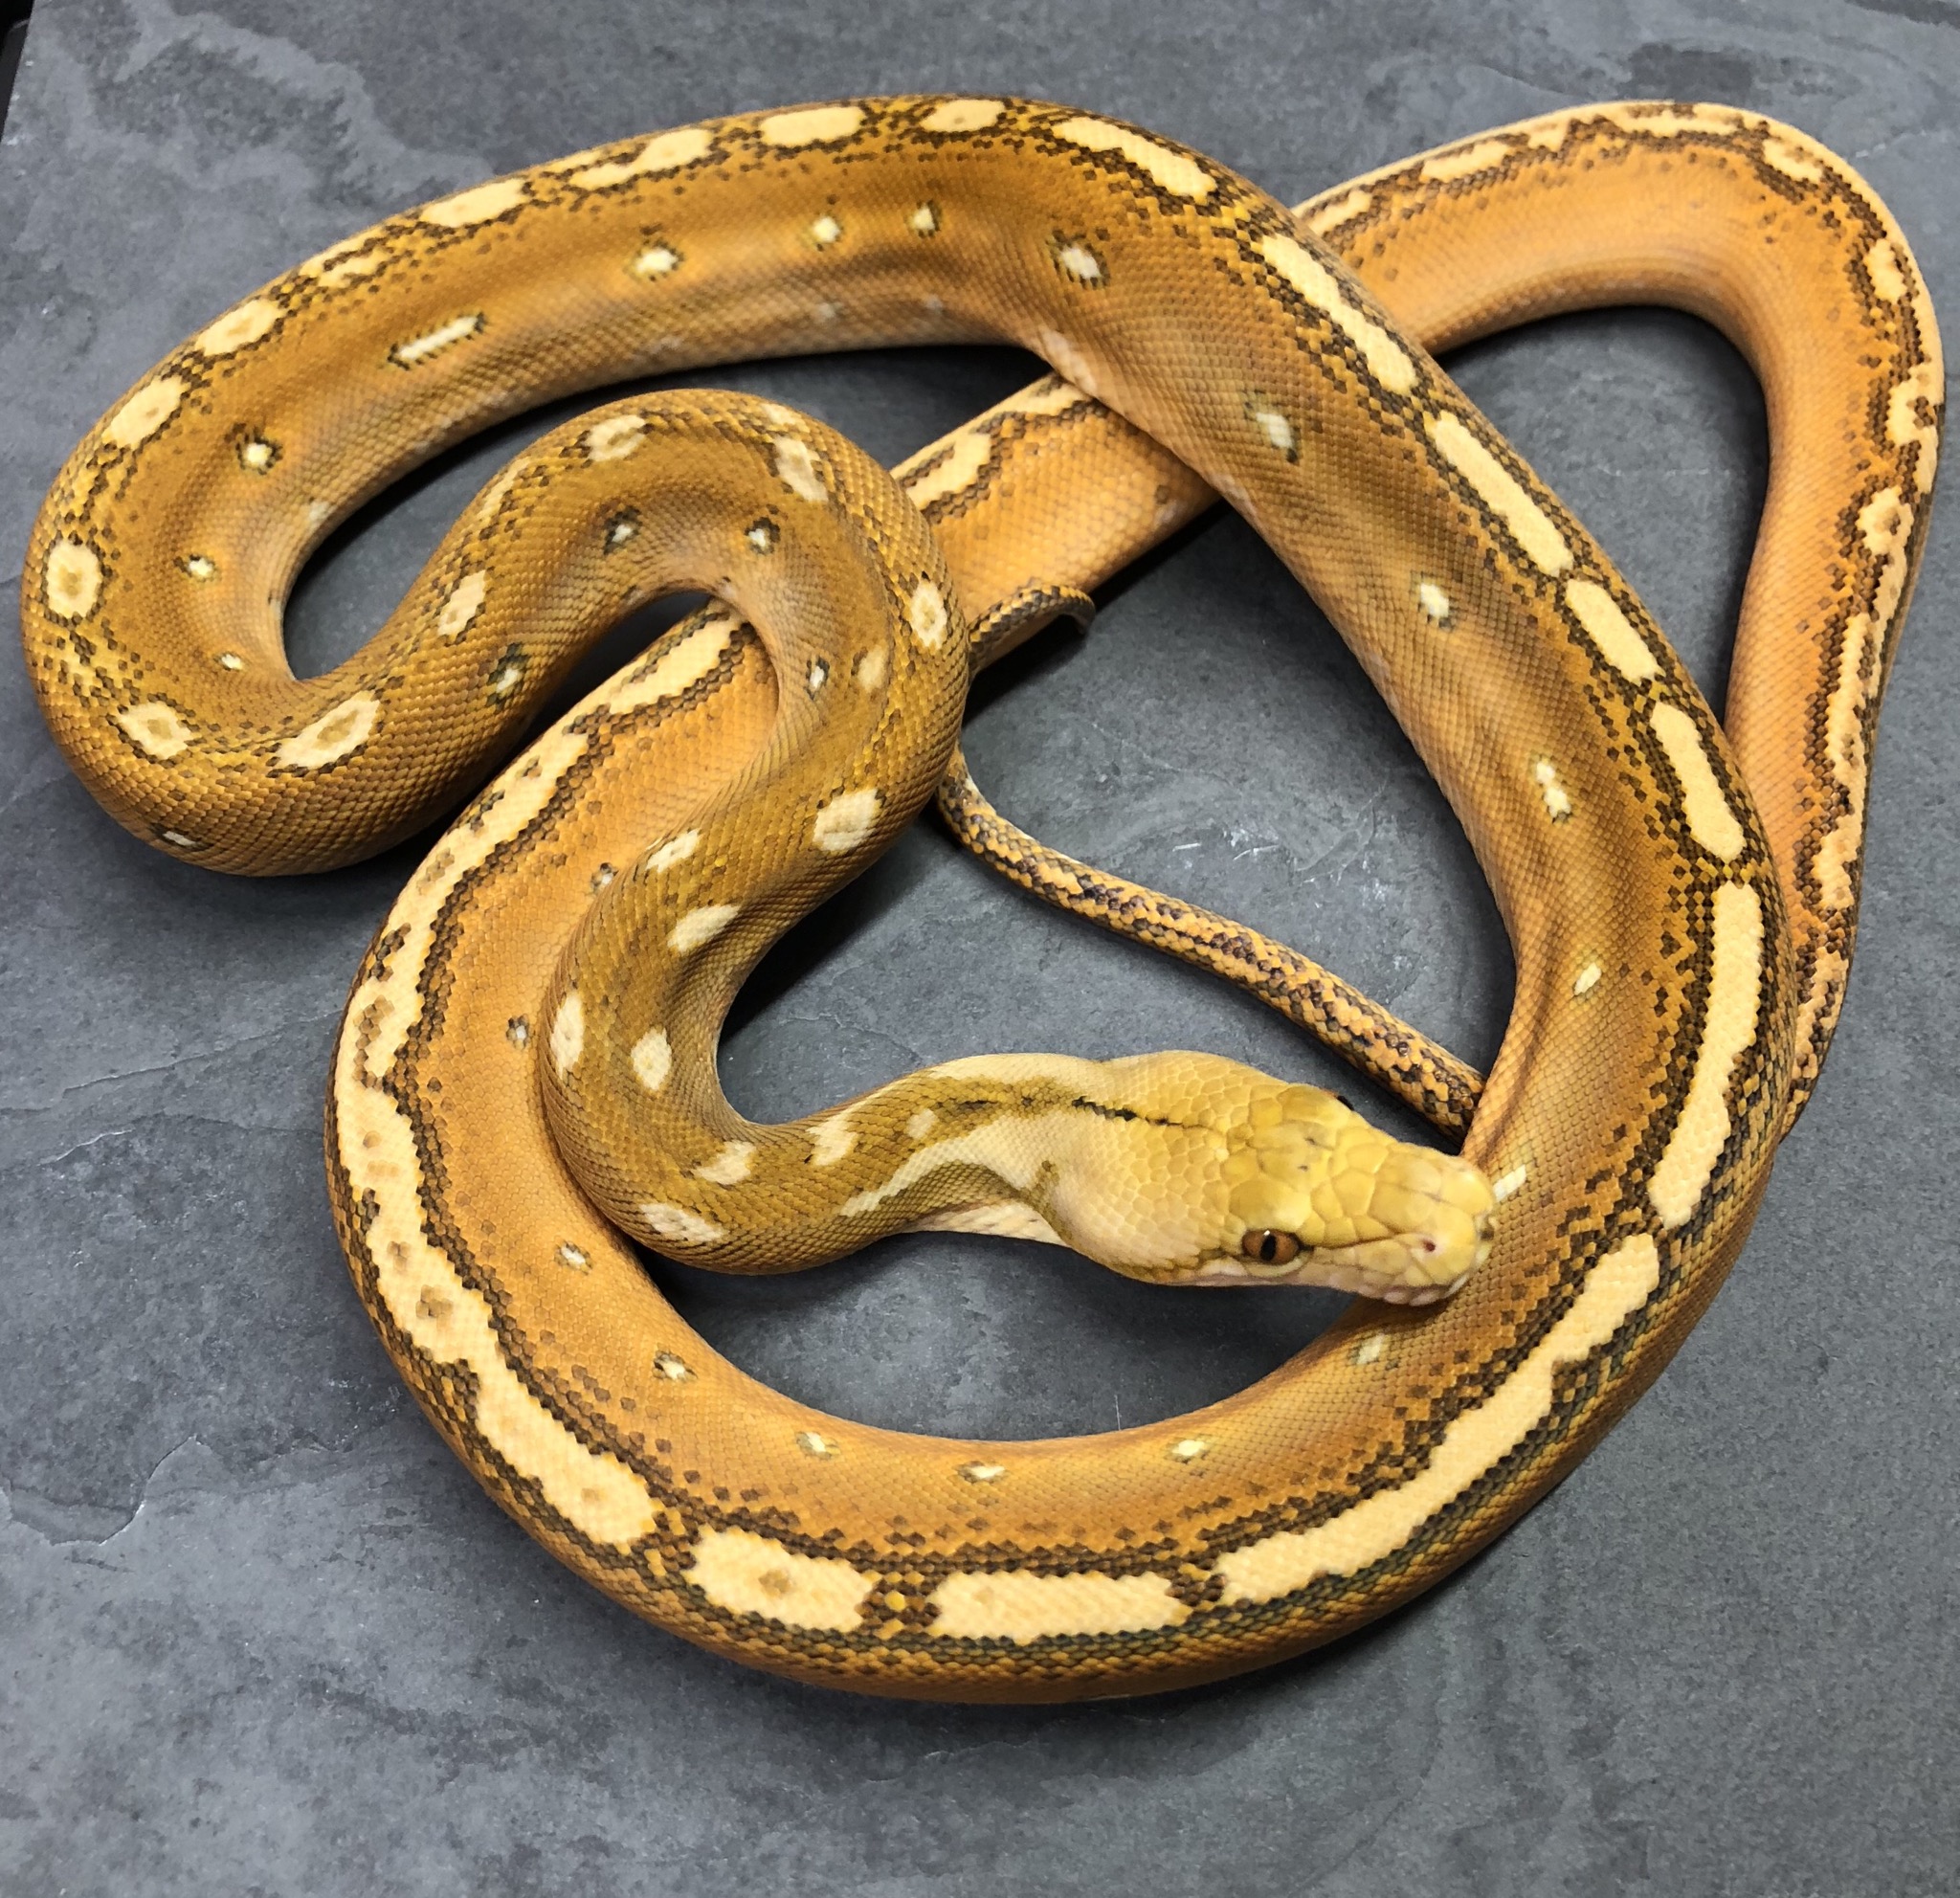 Orange Ghost Stripe Reticulated Python by Chase-N-Reptiles